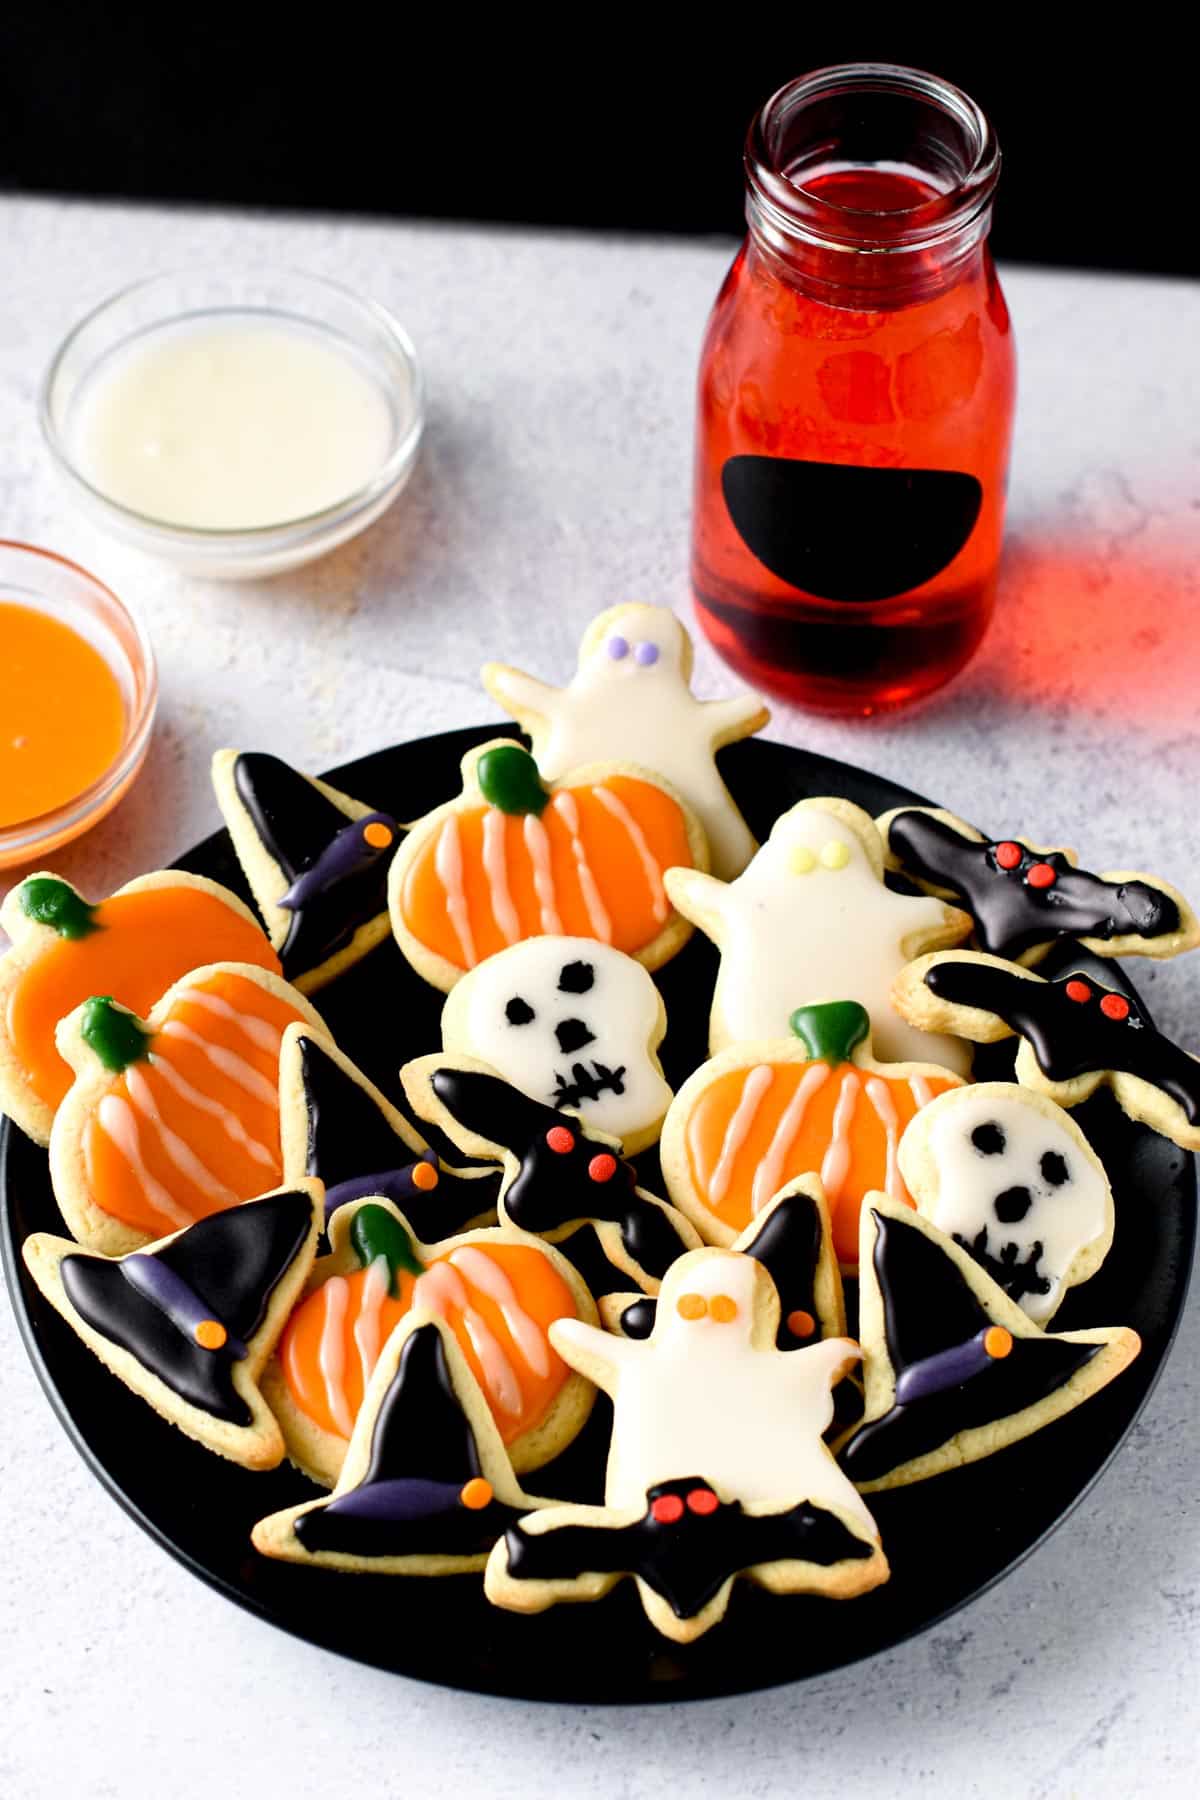 Vegan Halloween Sugar Cookies in ghost, skull, pumpkin, witch hat, and bat shapes on a dark plate with a red drink in the background.